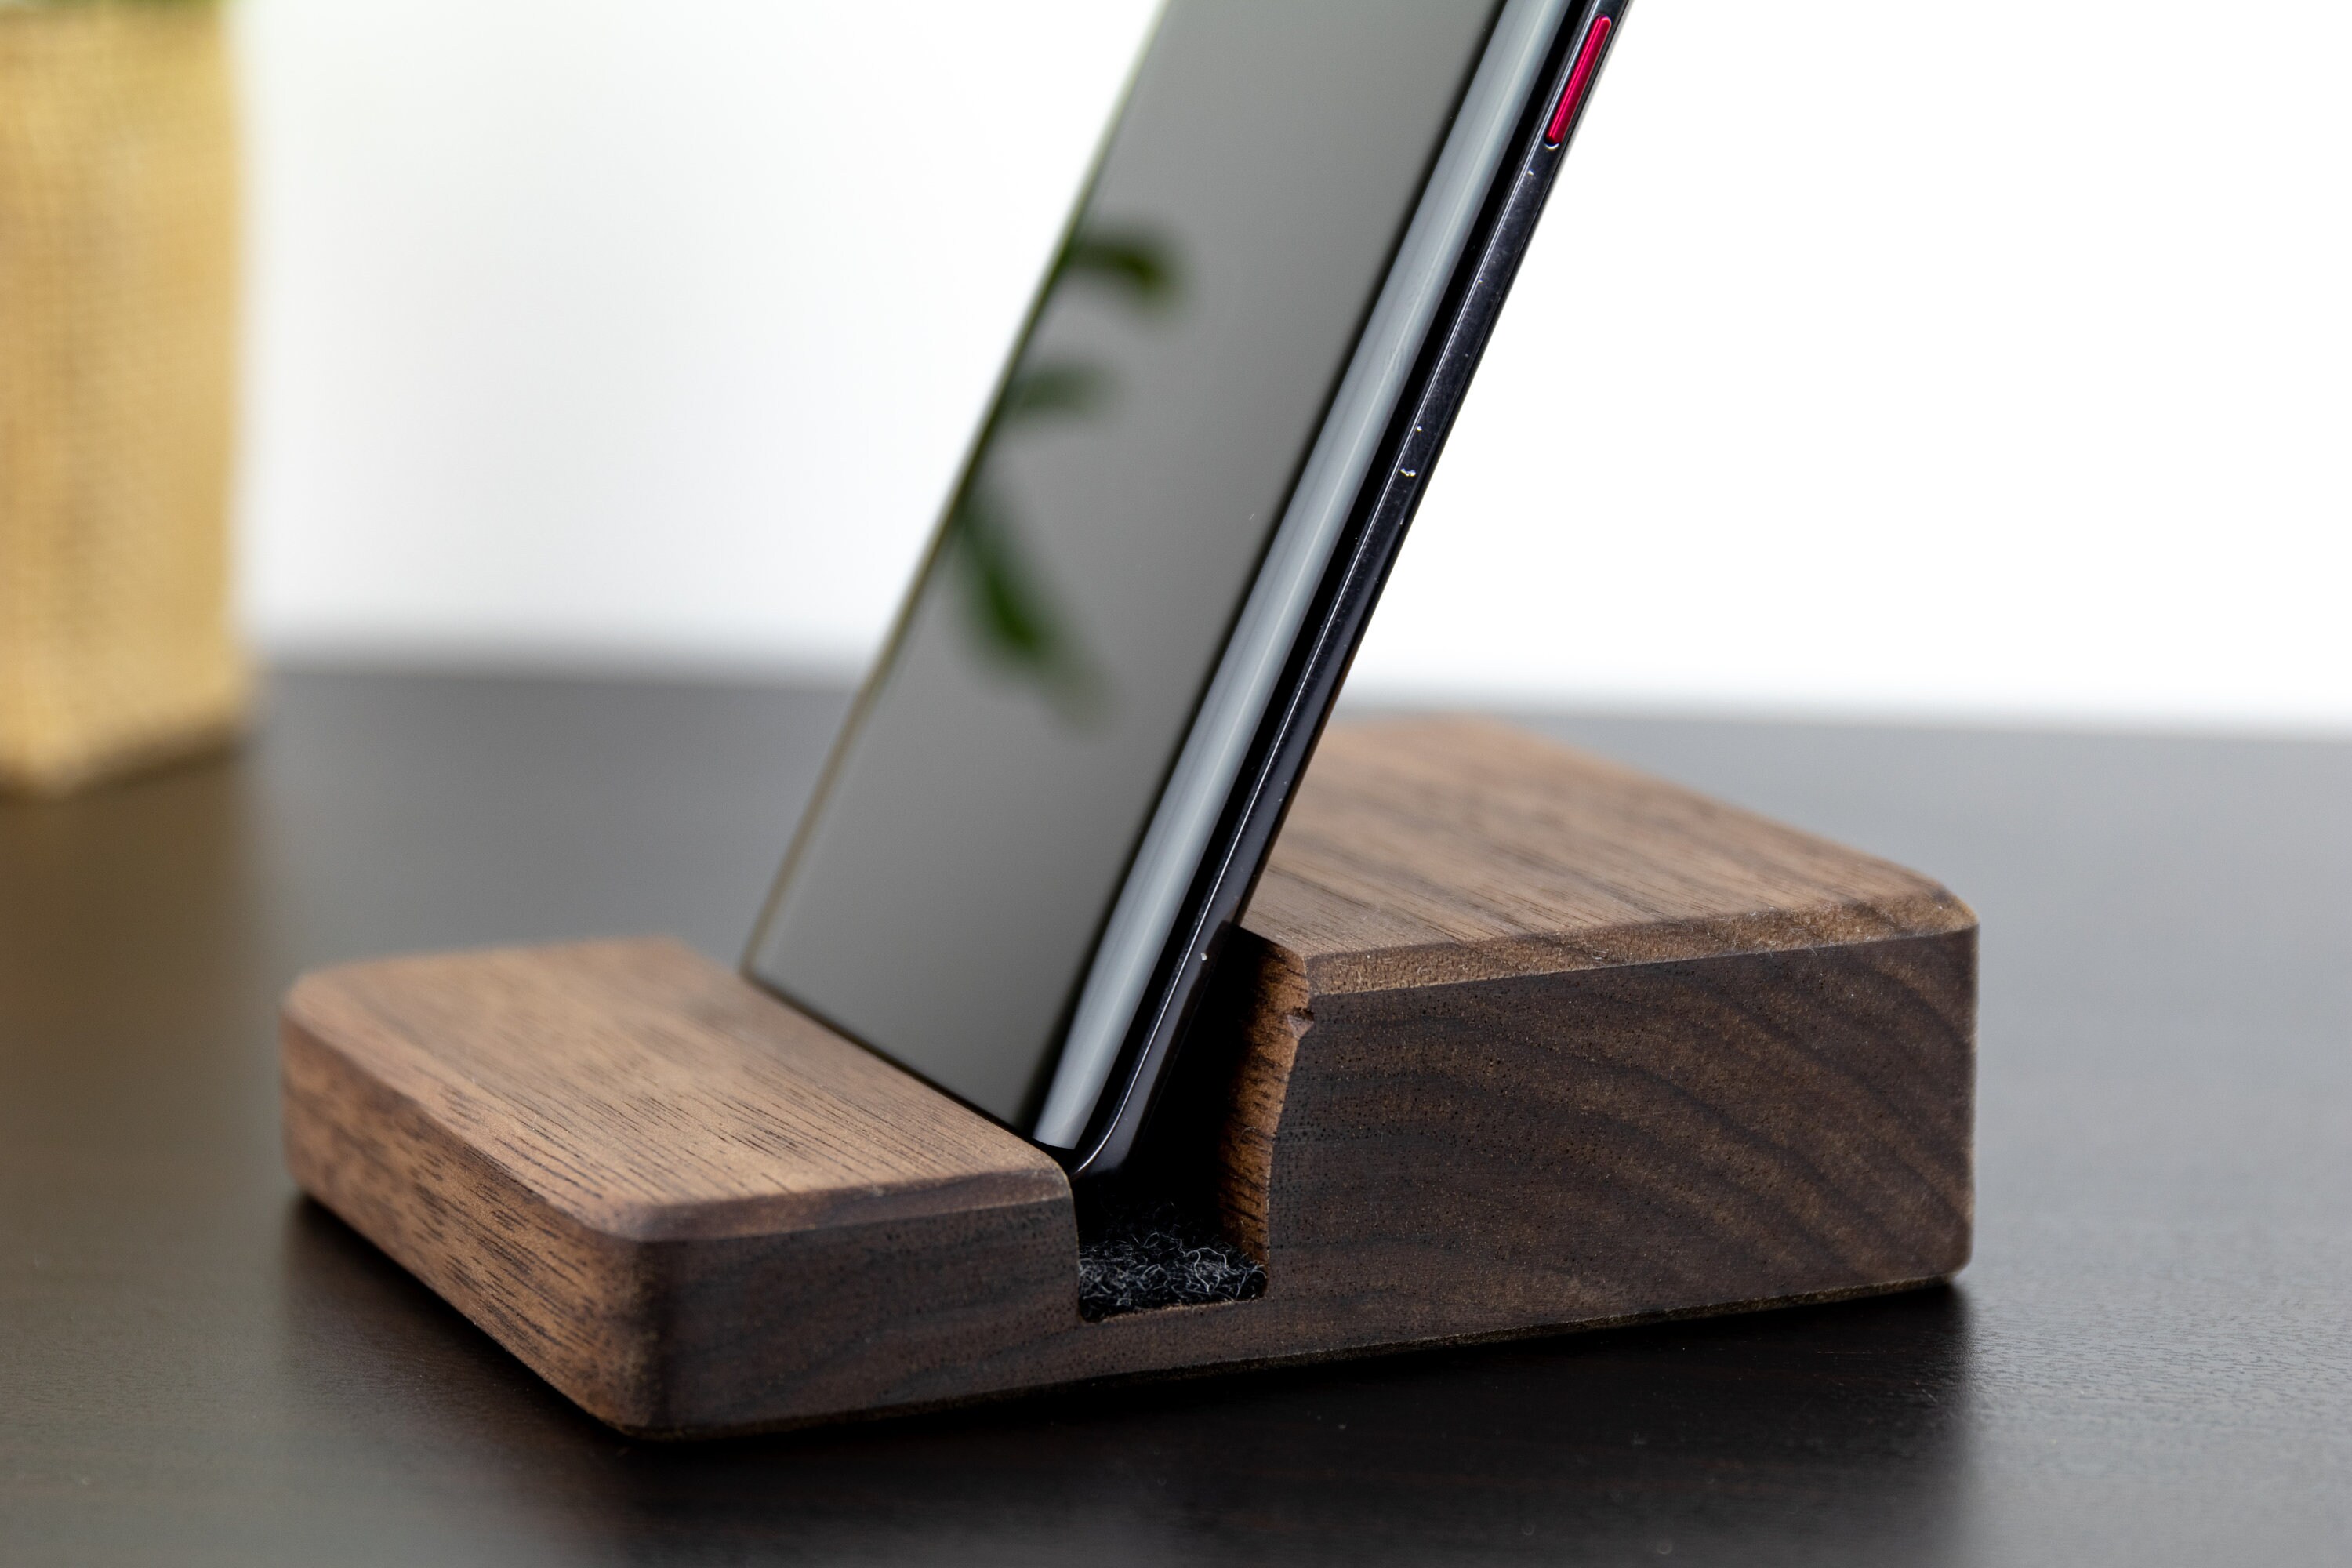 Wood Phone Stand, Wooden Phone Stand, Desktop Phone Holder, Mobile Phone Holder Double Groove Design (Set of 2)